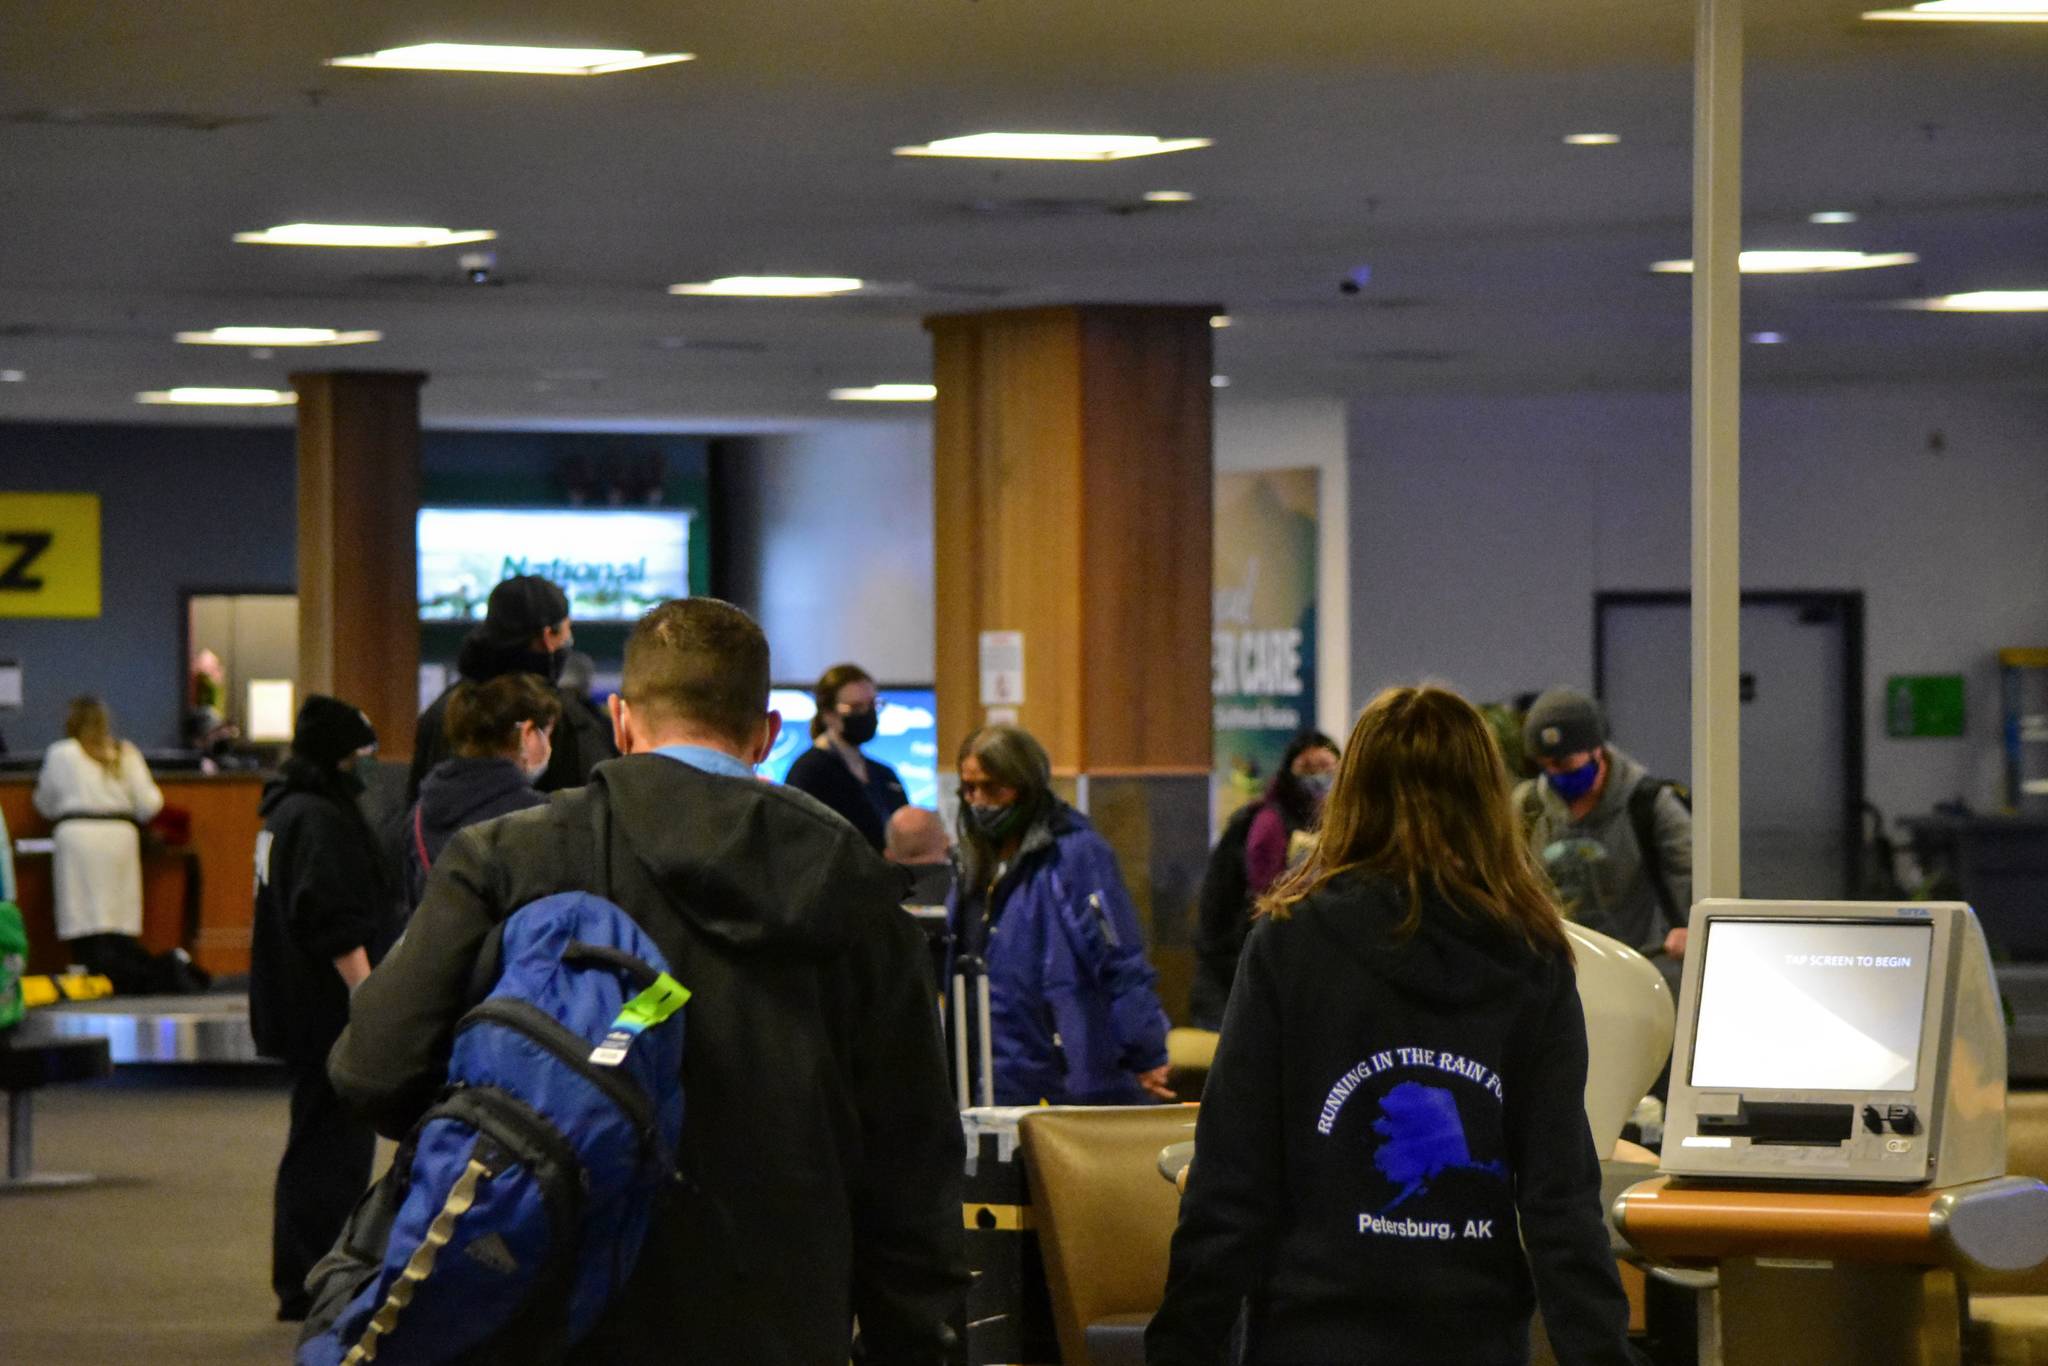 Travelers arriving at the Juneau International Airport on Wednesday, Nov. 25, 2020, made up only about half of what the airport normally sees in the days leading up to the Thanksgiving holiday. (Peter Segall / Juneau Empire)